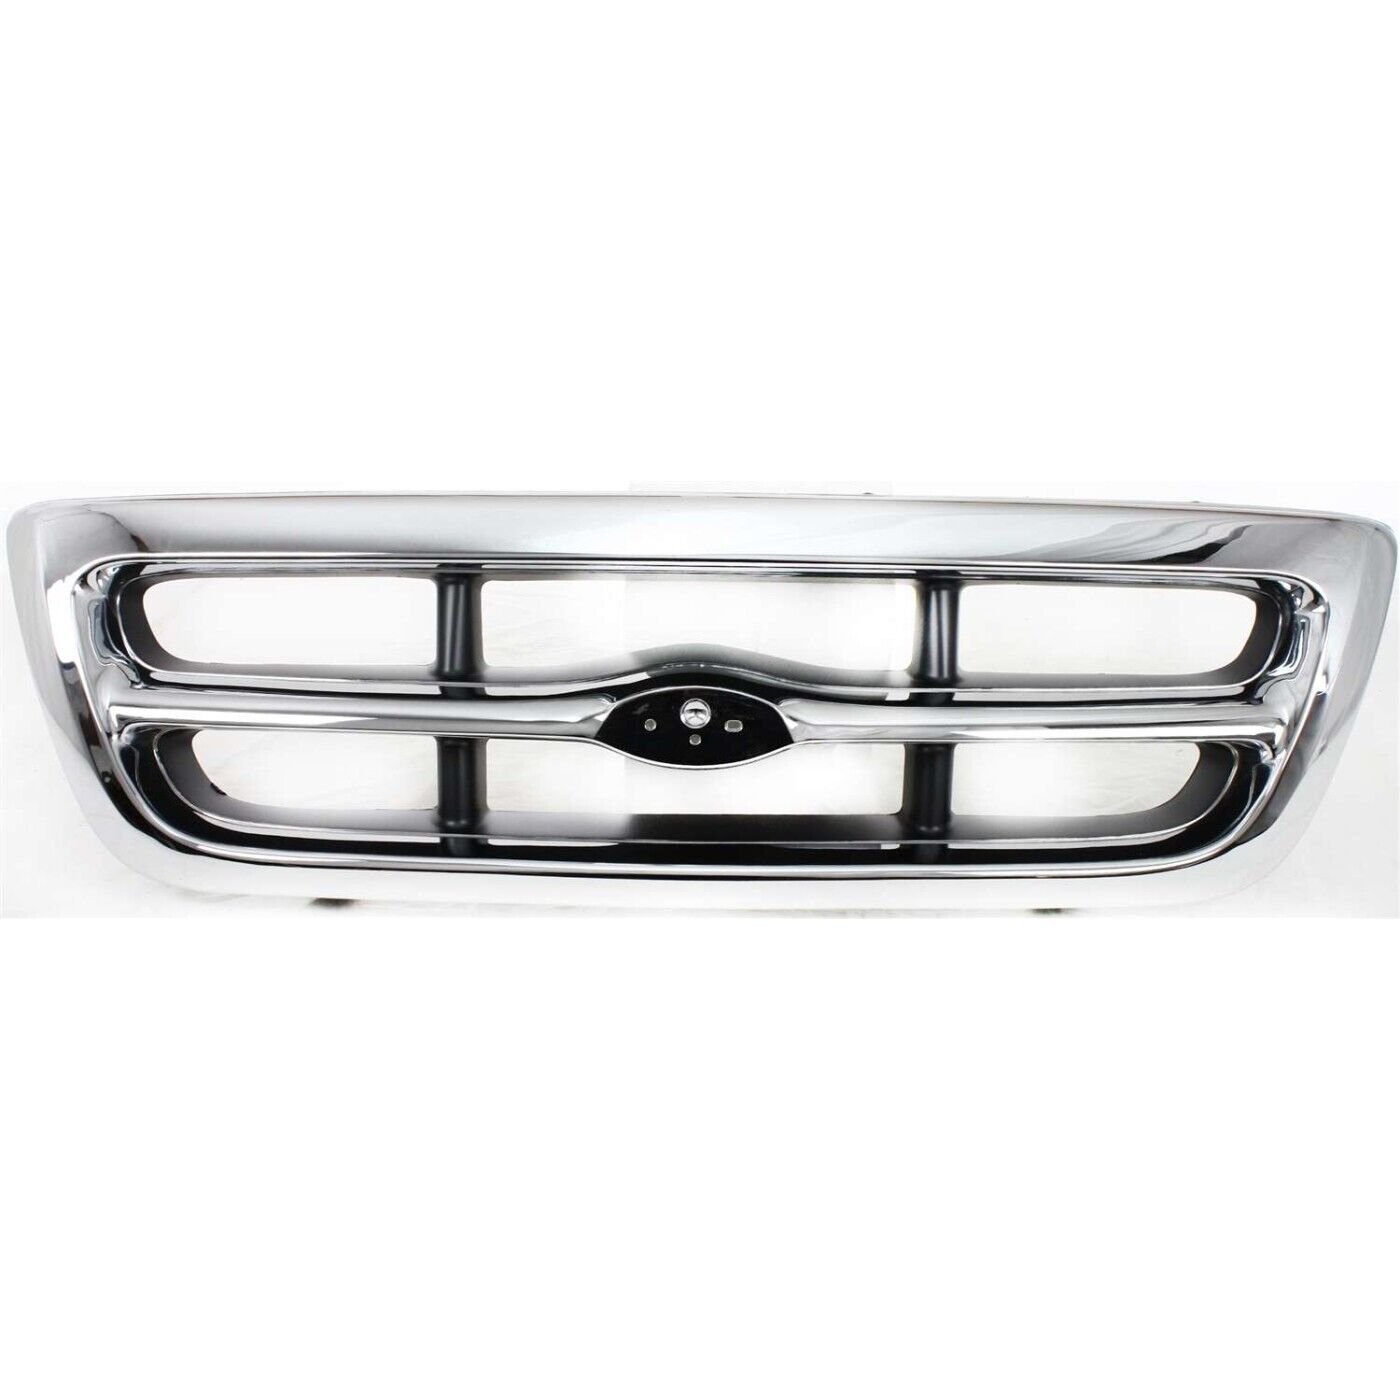 Grille Assembly For 1998-2000 Ford Ranger 2WD